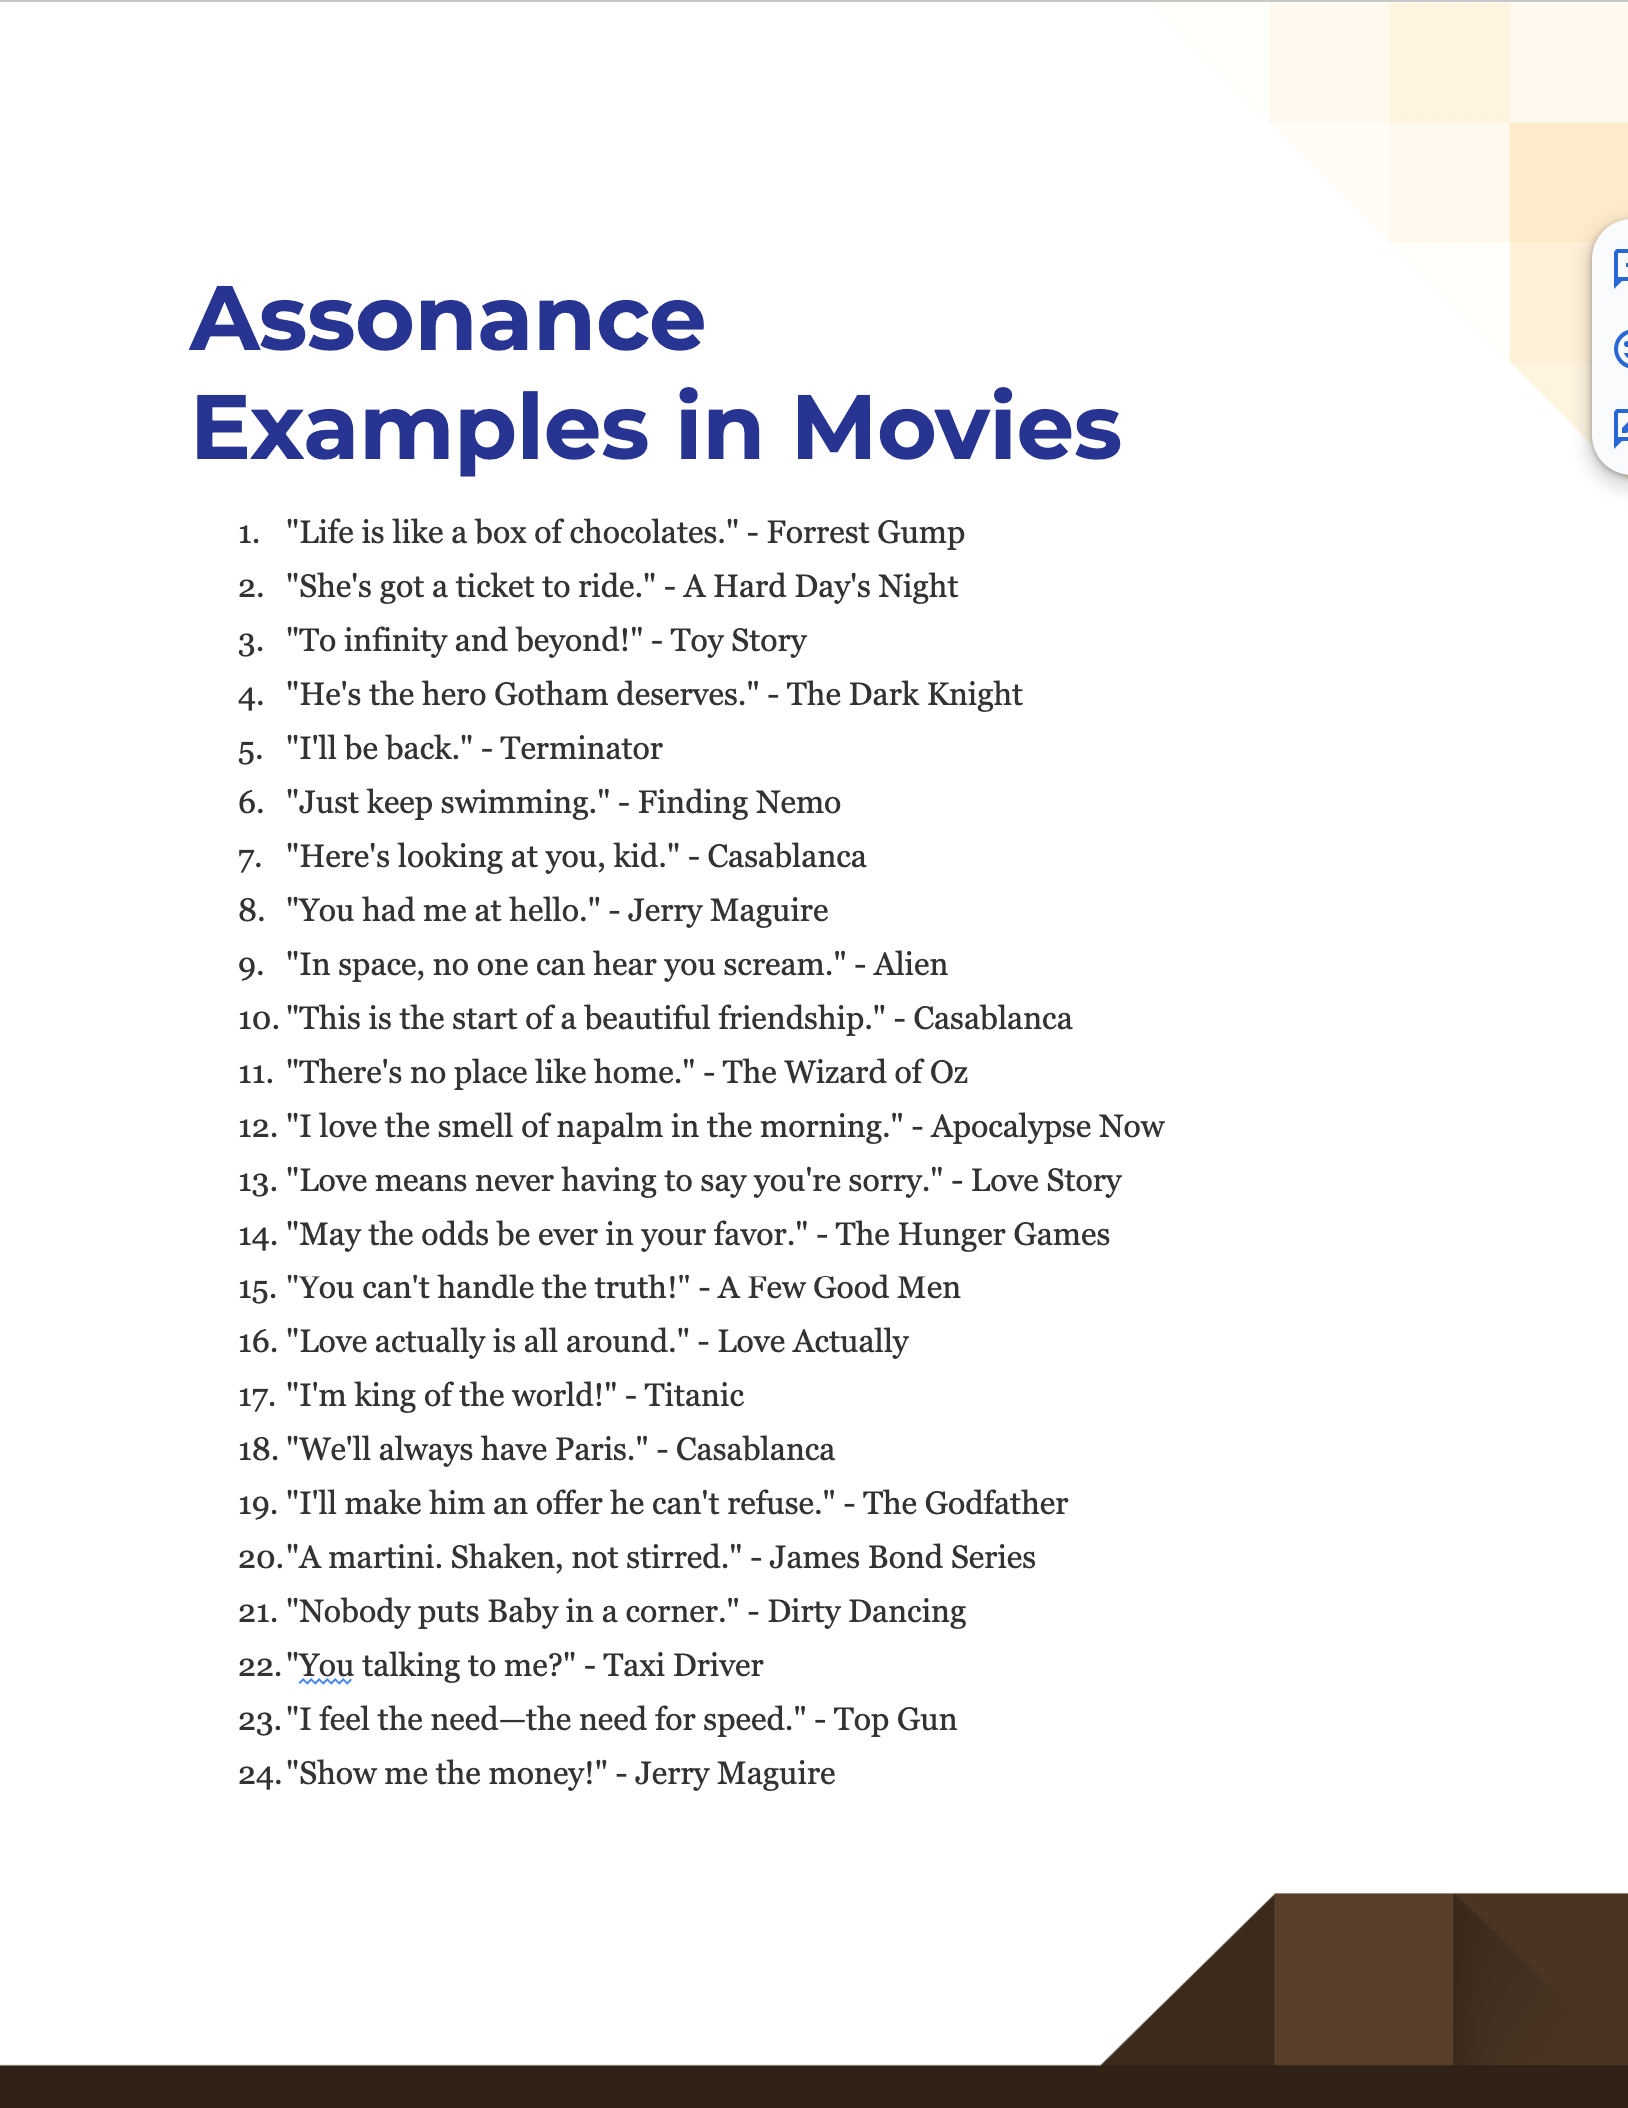 Assonance in Movies